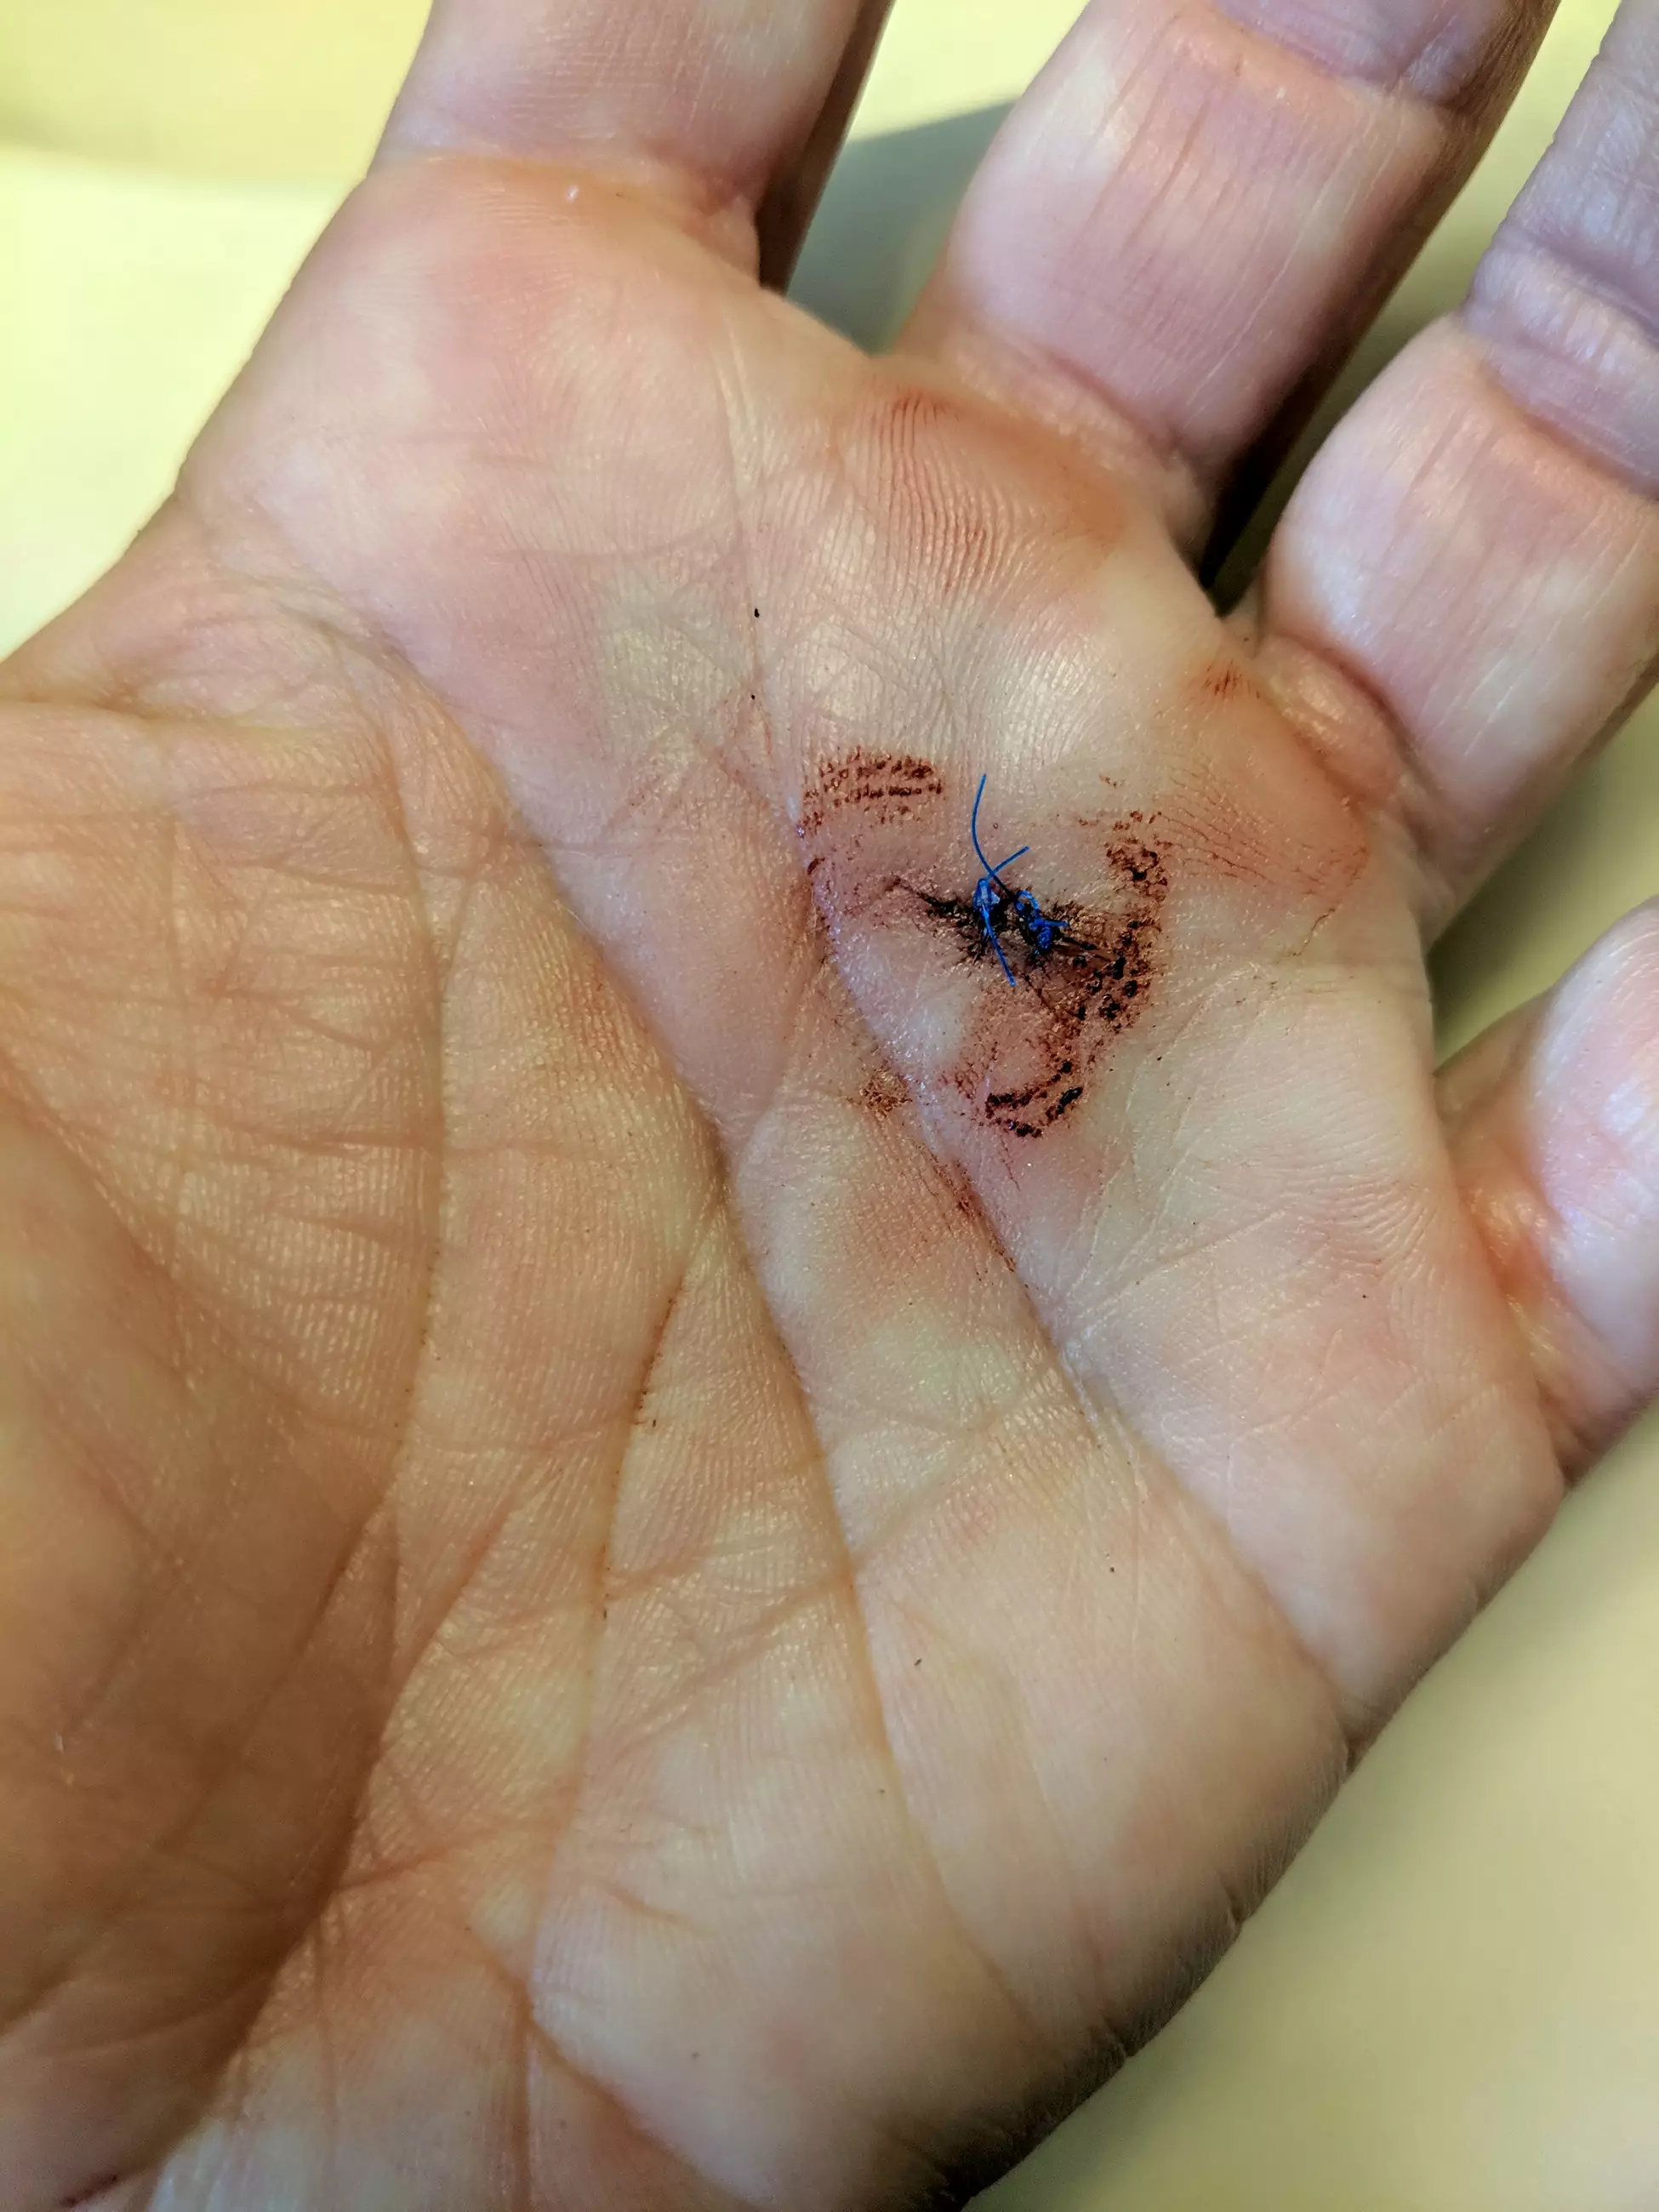 Melissa's hand scarred following surgery.